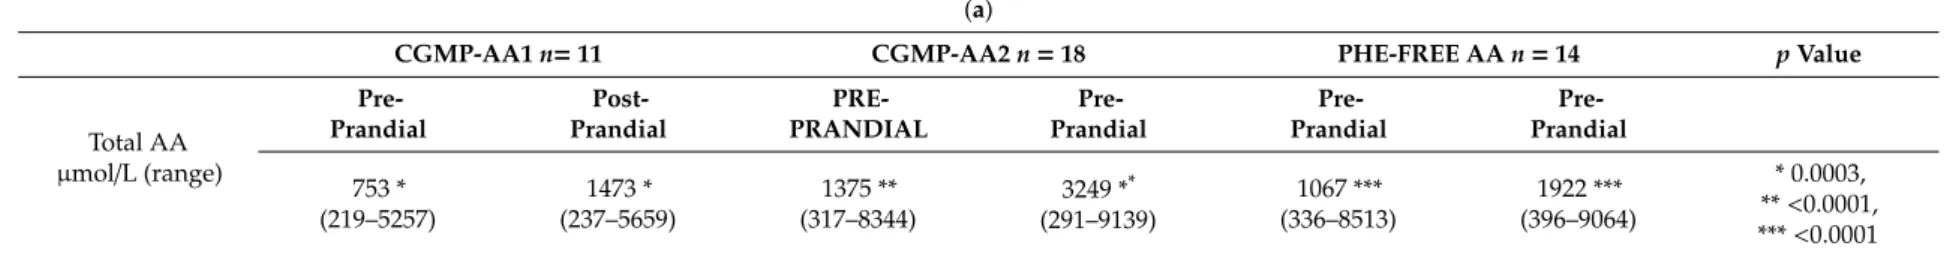 Table 3. (a) Median pre and postprandial total amino acids results for CGMP-AA1, CGMP-AA2, and PHE-FREE AA protein substitutes